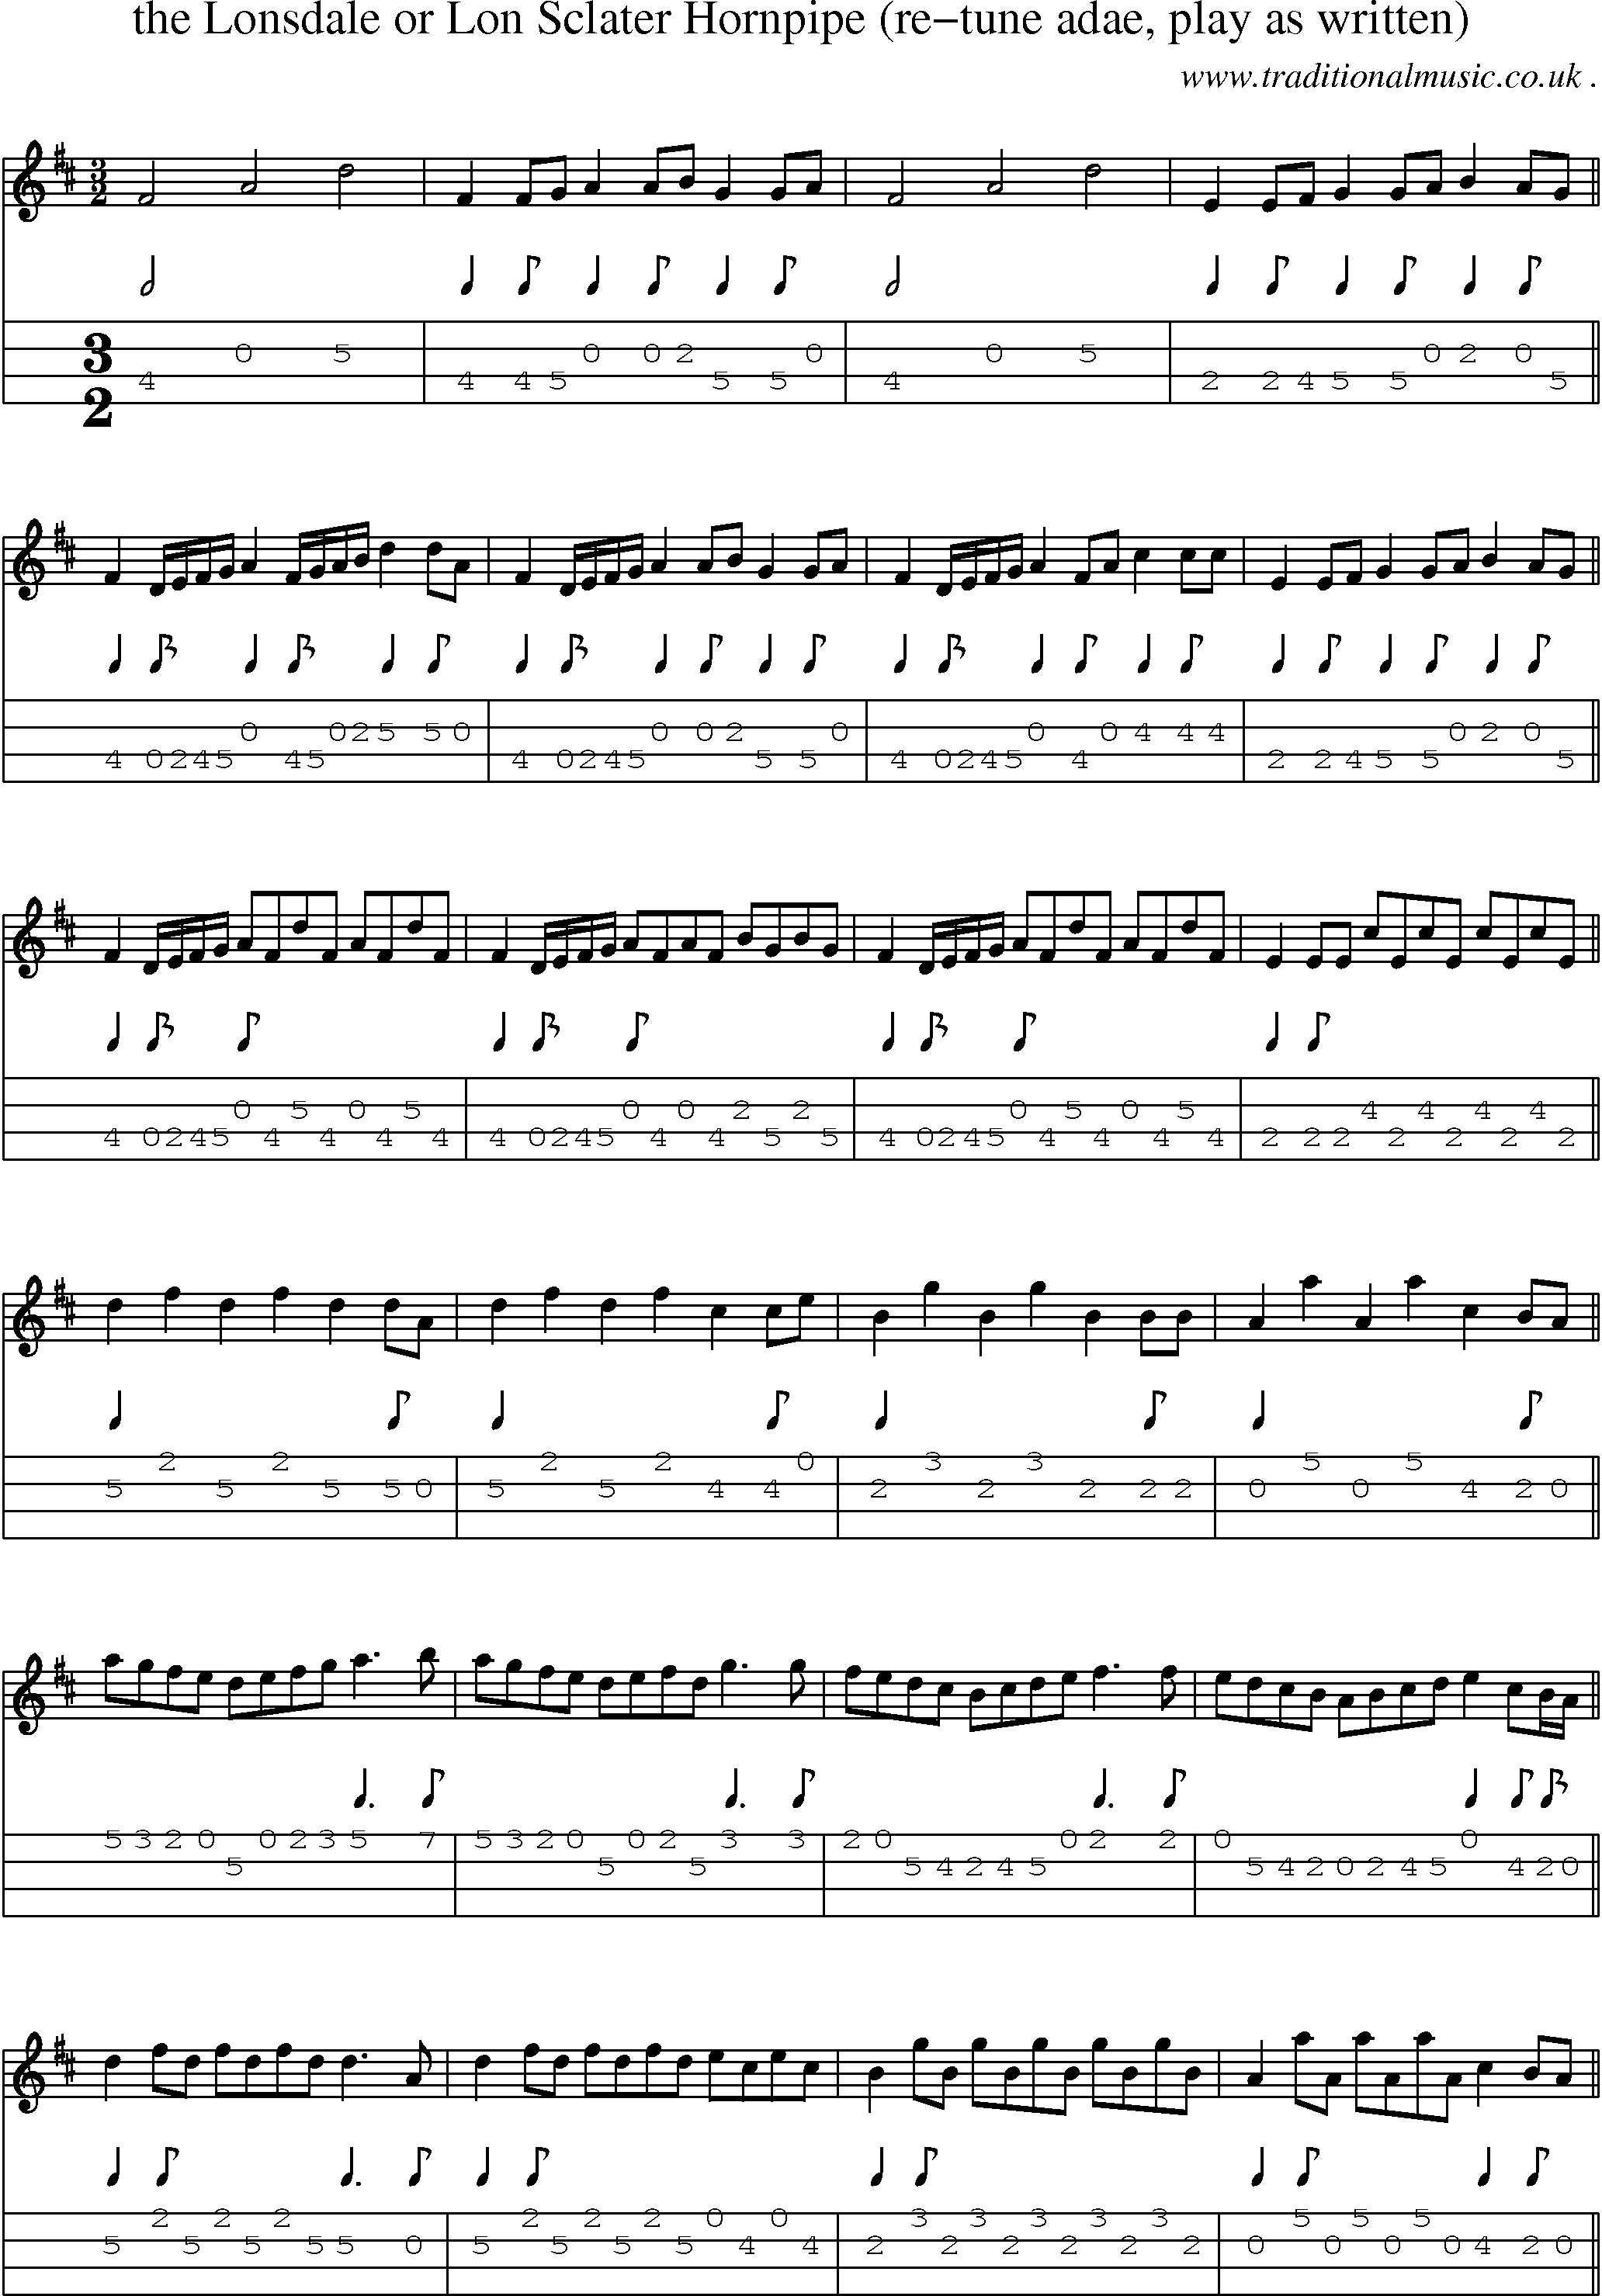 Sheet-Music and Mandolin Tabs for The Lonsdale Or Lon Sclater Hornpipe (re-tune Adae Play As Written)